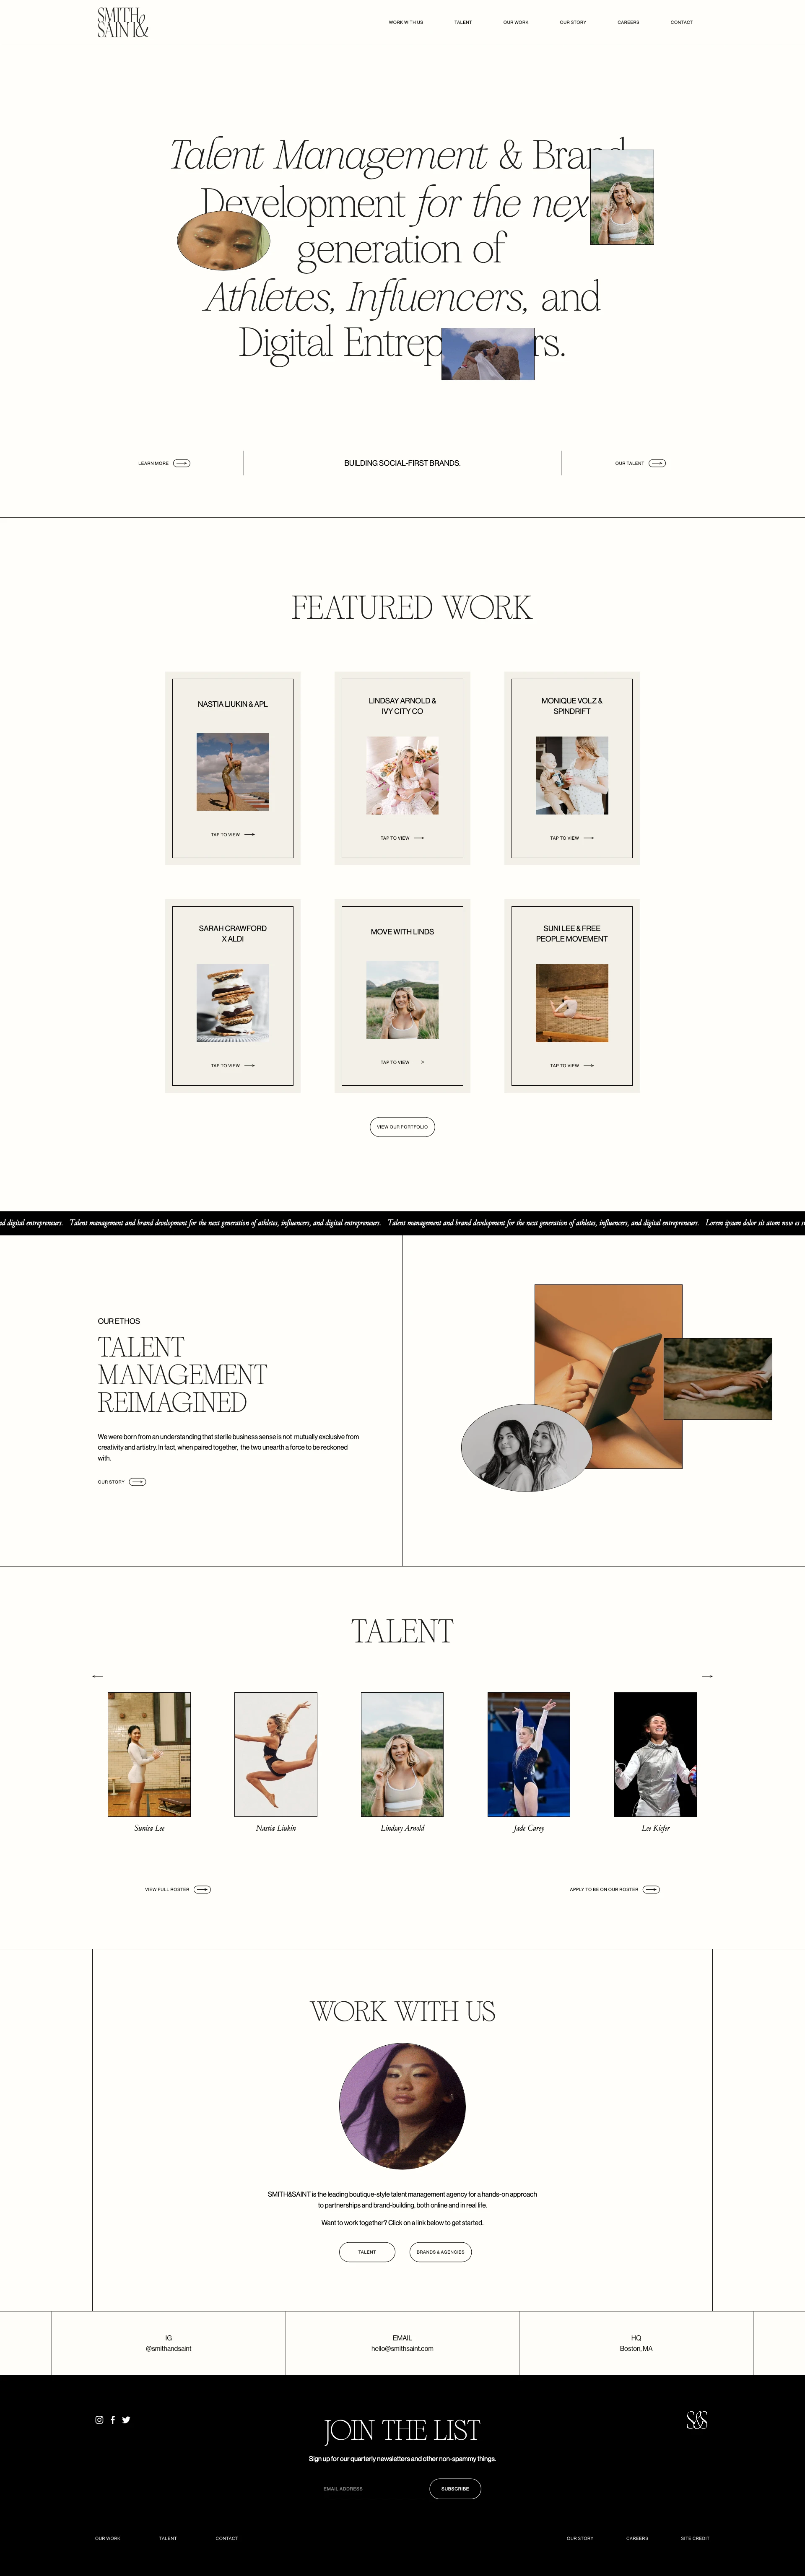 SMITH&SAINT Landing Page Example: Talent management for the next generation of athletes, influencers, & digital entrepreneurs.